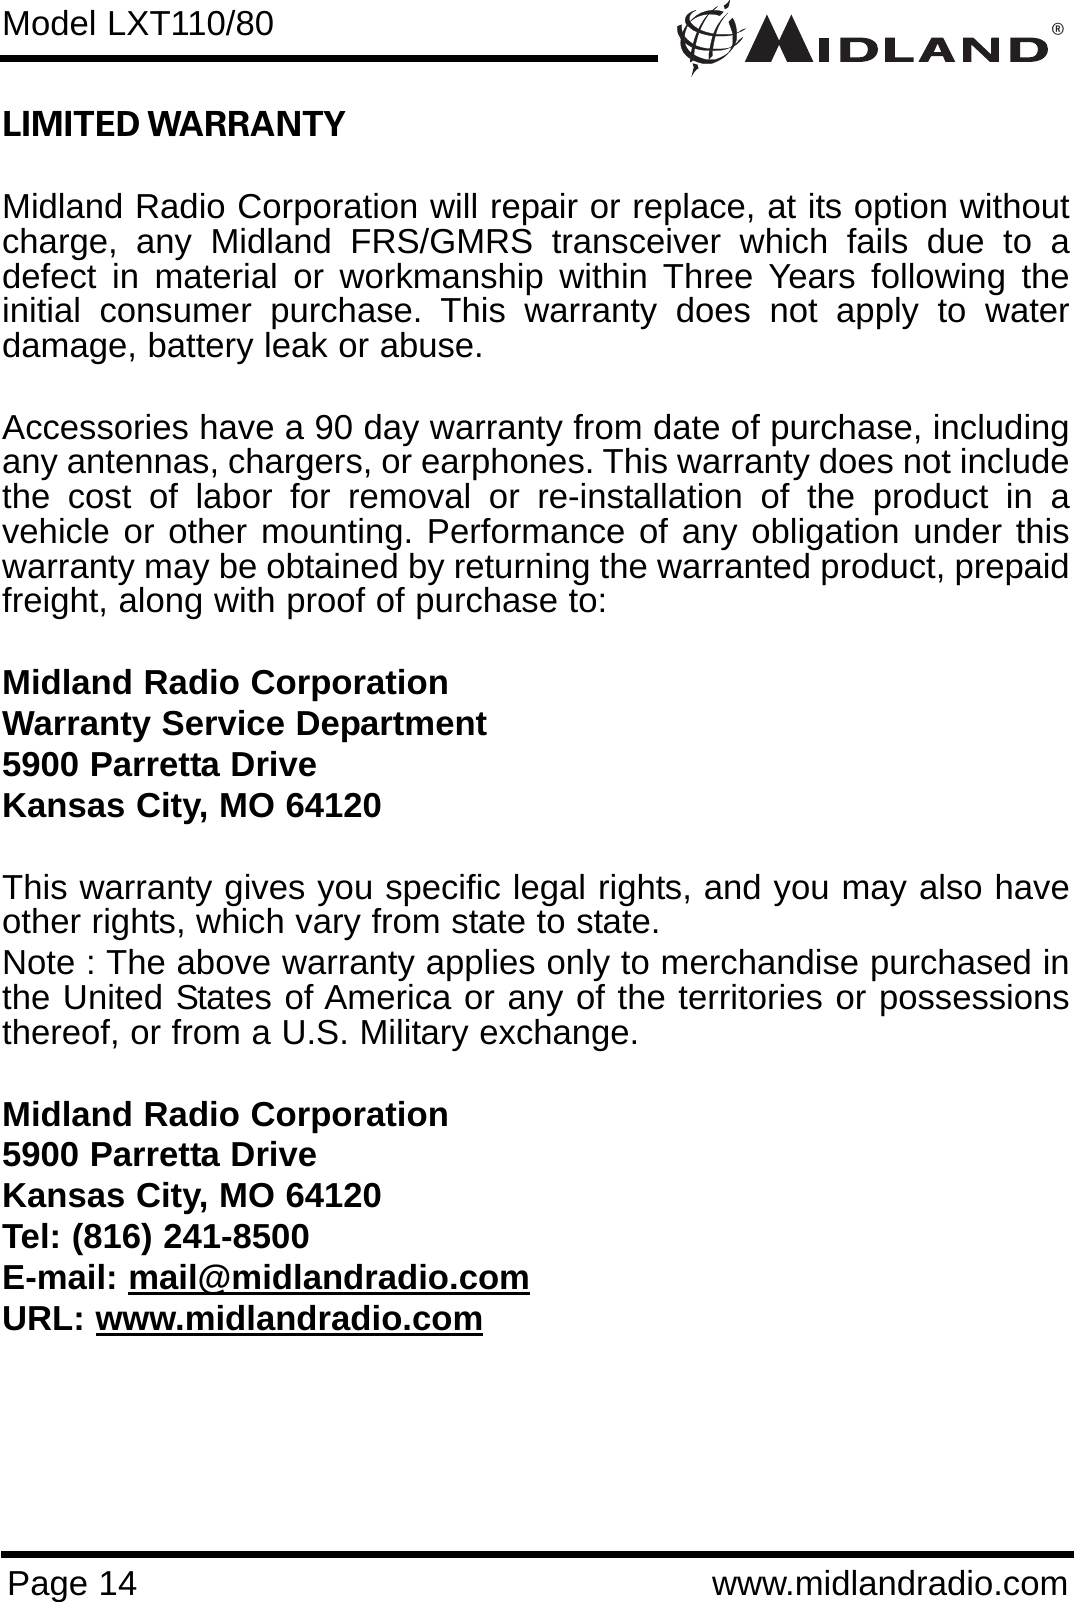 ®Page 14 www.midlandradio.comLIMITED WARRANTY Midland Radio Corporation will repair or replace, at its option withoutcharge, any Midland FRS/GMRS transceiver which fails due to adefect in material or workmanship within Three Years following theinitial consumer purchase. This warranty does not apply to waterdamage, battery leak or abuse.Accessories have a 90 day warranty from date of purchase, includingany antennas, chargers, or earphones. This warranty does not includethe cost of labor for removal or re-installation of the product in avehicle or other mounting. Performance of any obligation under thiswarranty may be obtained by returning the warranted product, prepaidfreight, along with proof of purchase to:Midland Radio CorporationWarranty Service Department5900 Parretta DriveKansas City, MO 64120This warranty gives you specific legal rights, and you may also haveother rights, which vary from state to state.Note : The above warranty applies only to merchandise purchased inthe United States of America or any of the territories or possessionsthereof, or from a U.S. Military exchange.Midland Radio Corporation5900 Parretta DriveKansas City, MO 64120Tel: (816) 241-8500E-mail: mail@midlandradio.comURL: www.midlandradio.comModel LXT110/80